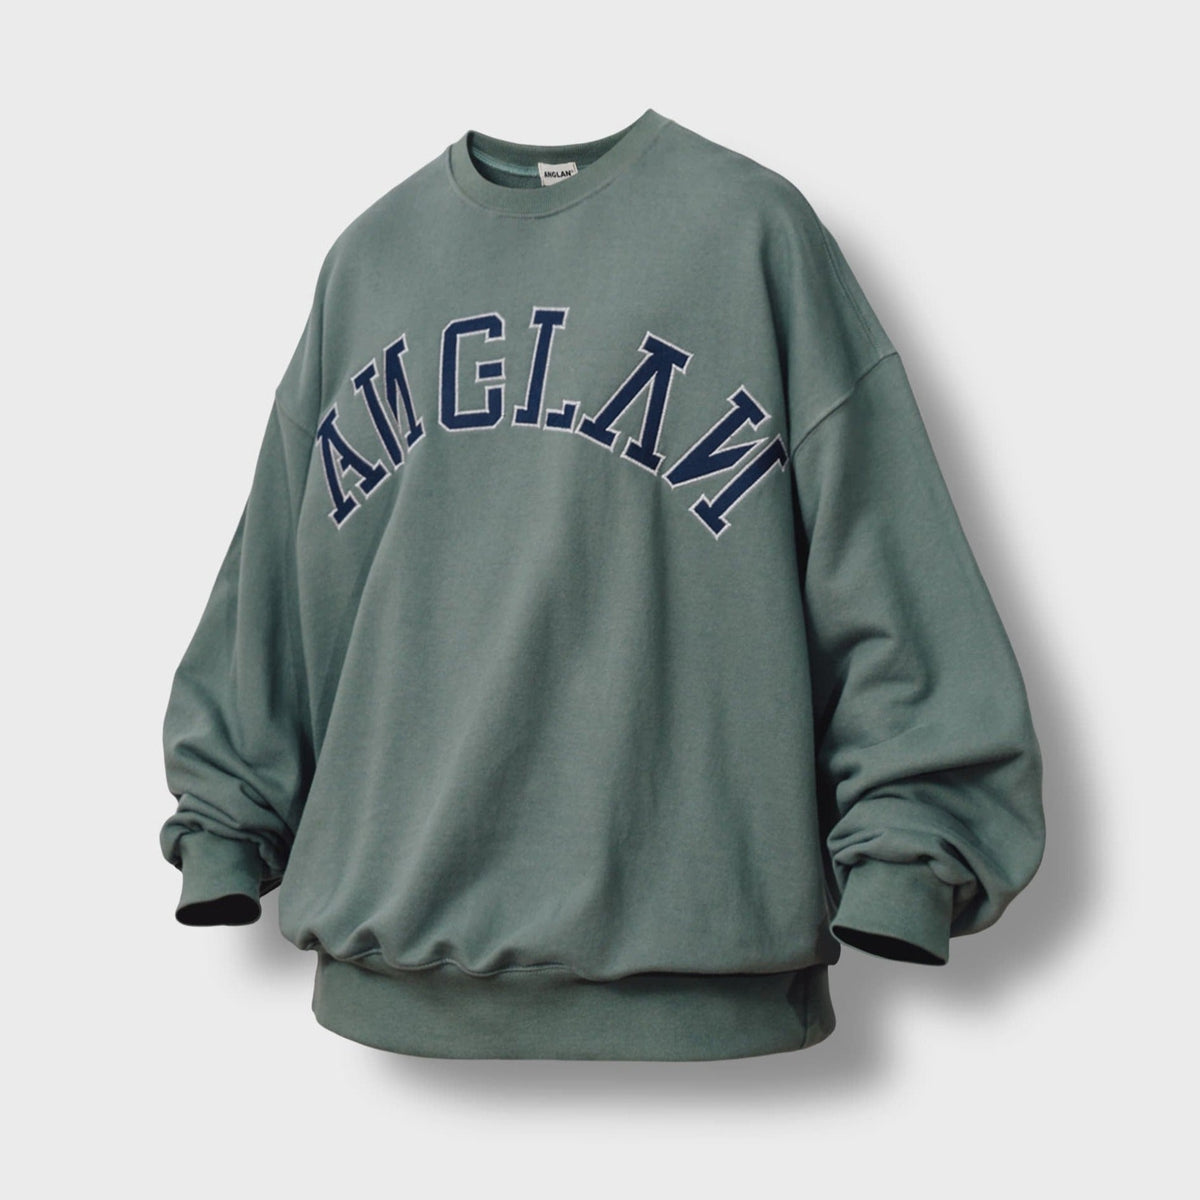 Anglan APPLIQUE BIG LOGO SWEAT SHIRT - OLIVE GREEN - The Great Divide